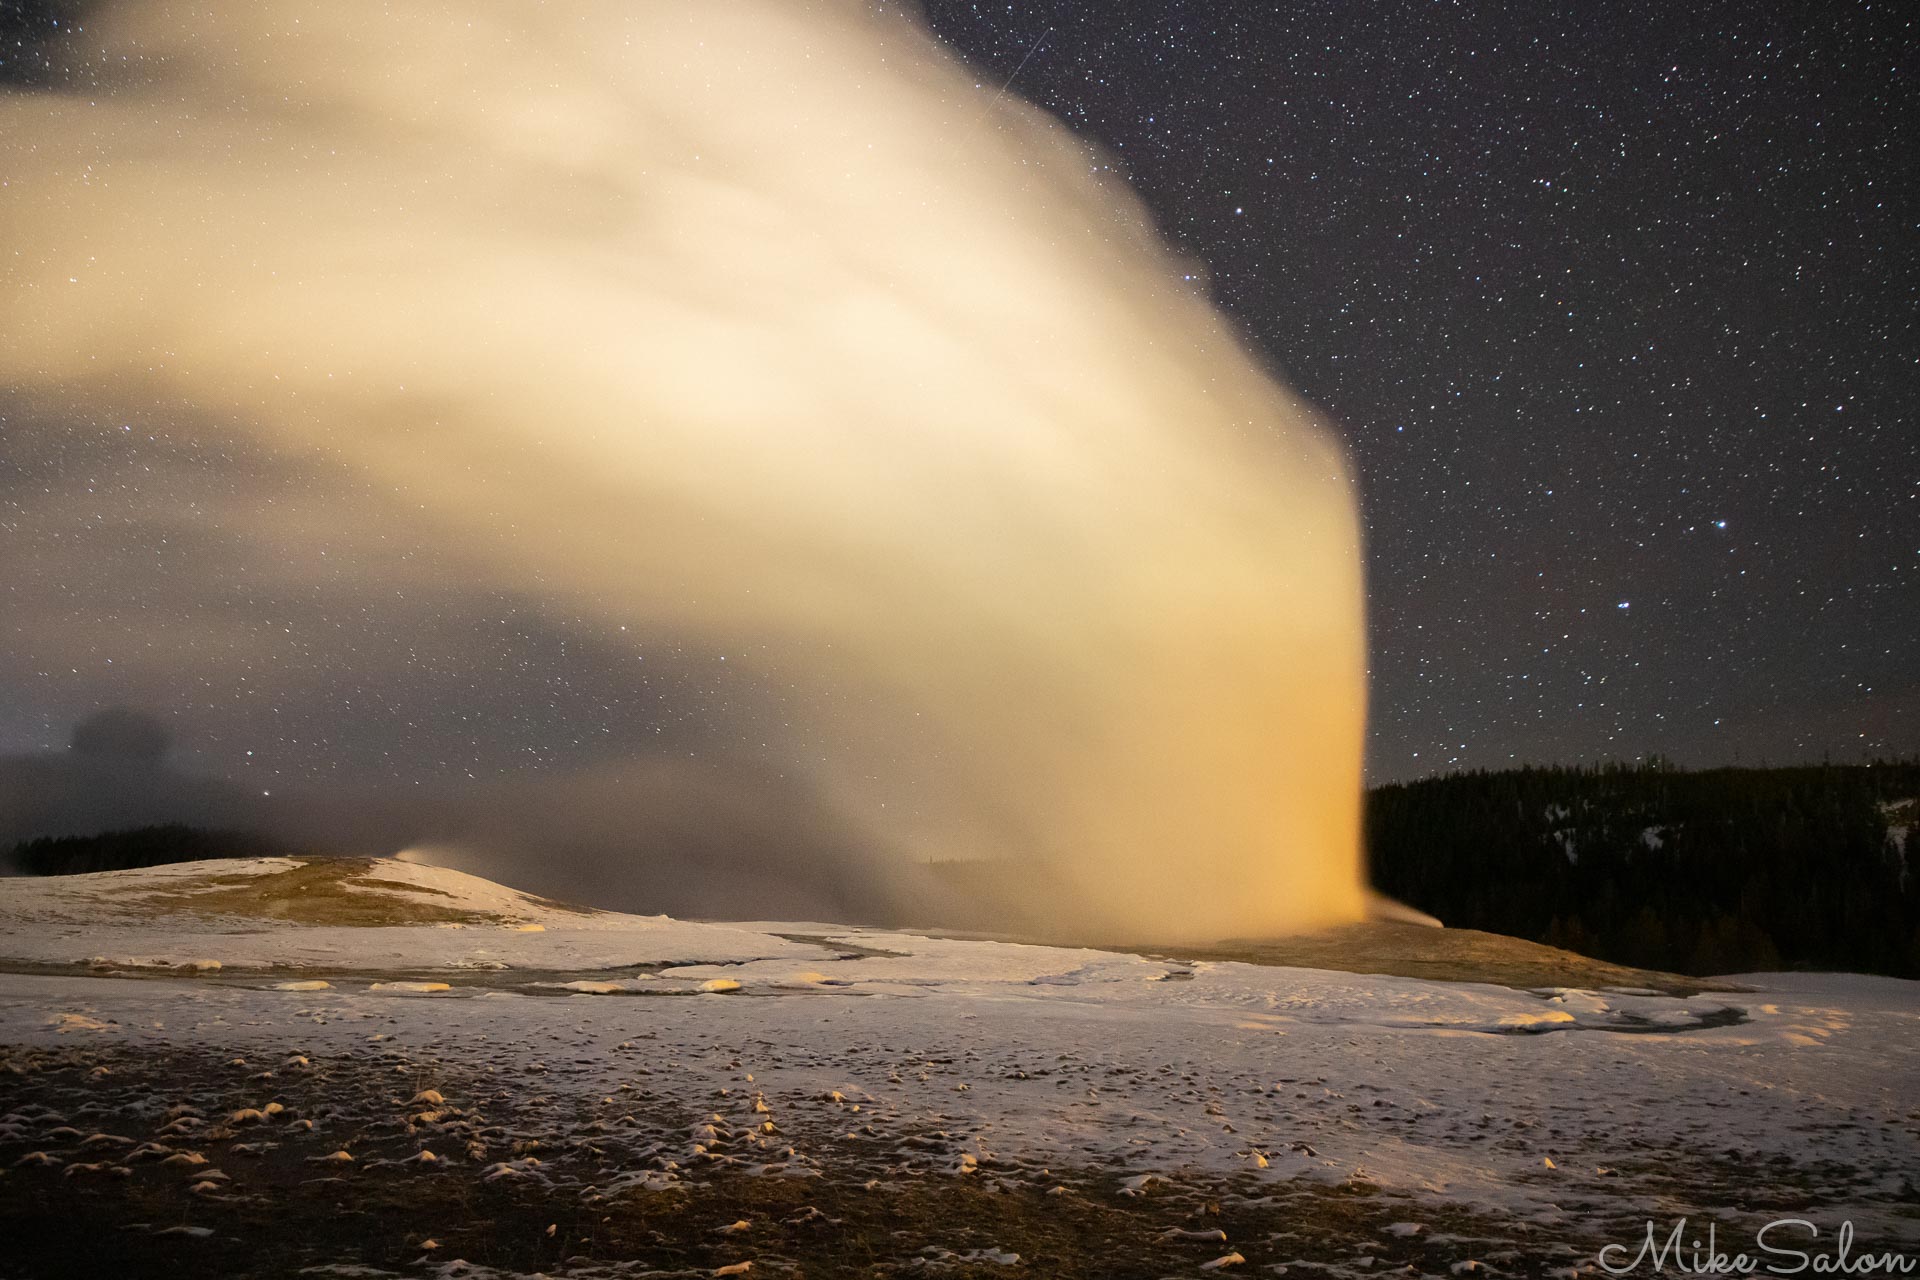 Old Faithful Eruption : A vertical jet of boiling water, then the steam blows off with the wind as Old Faithful erupts at night in Yellowstone National Park. (0D0A4091.jpg)<br>Camera: Canon EOS 5D Mark IV